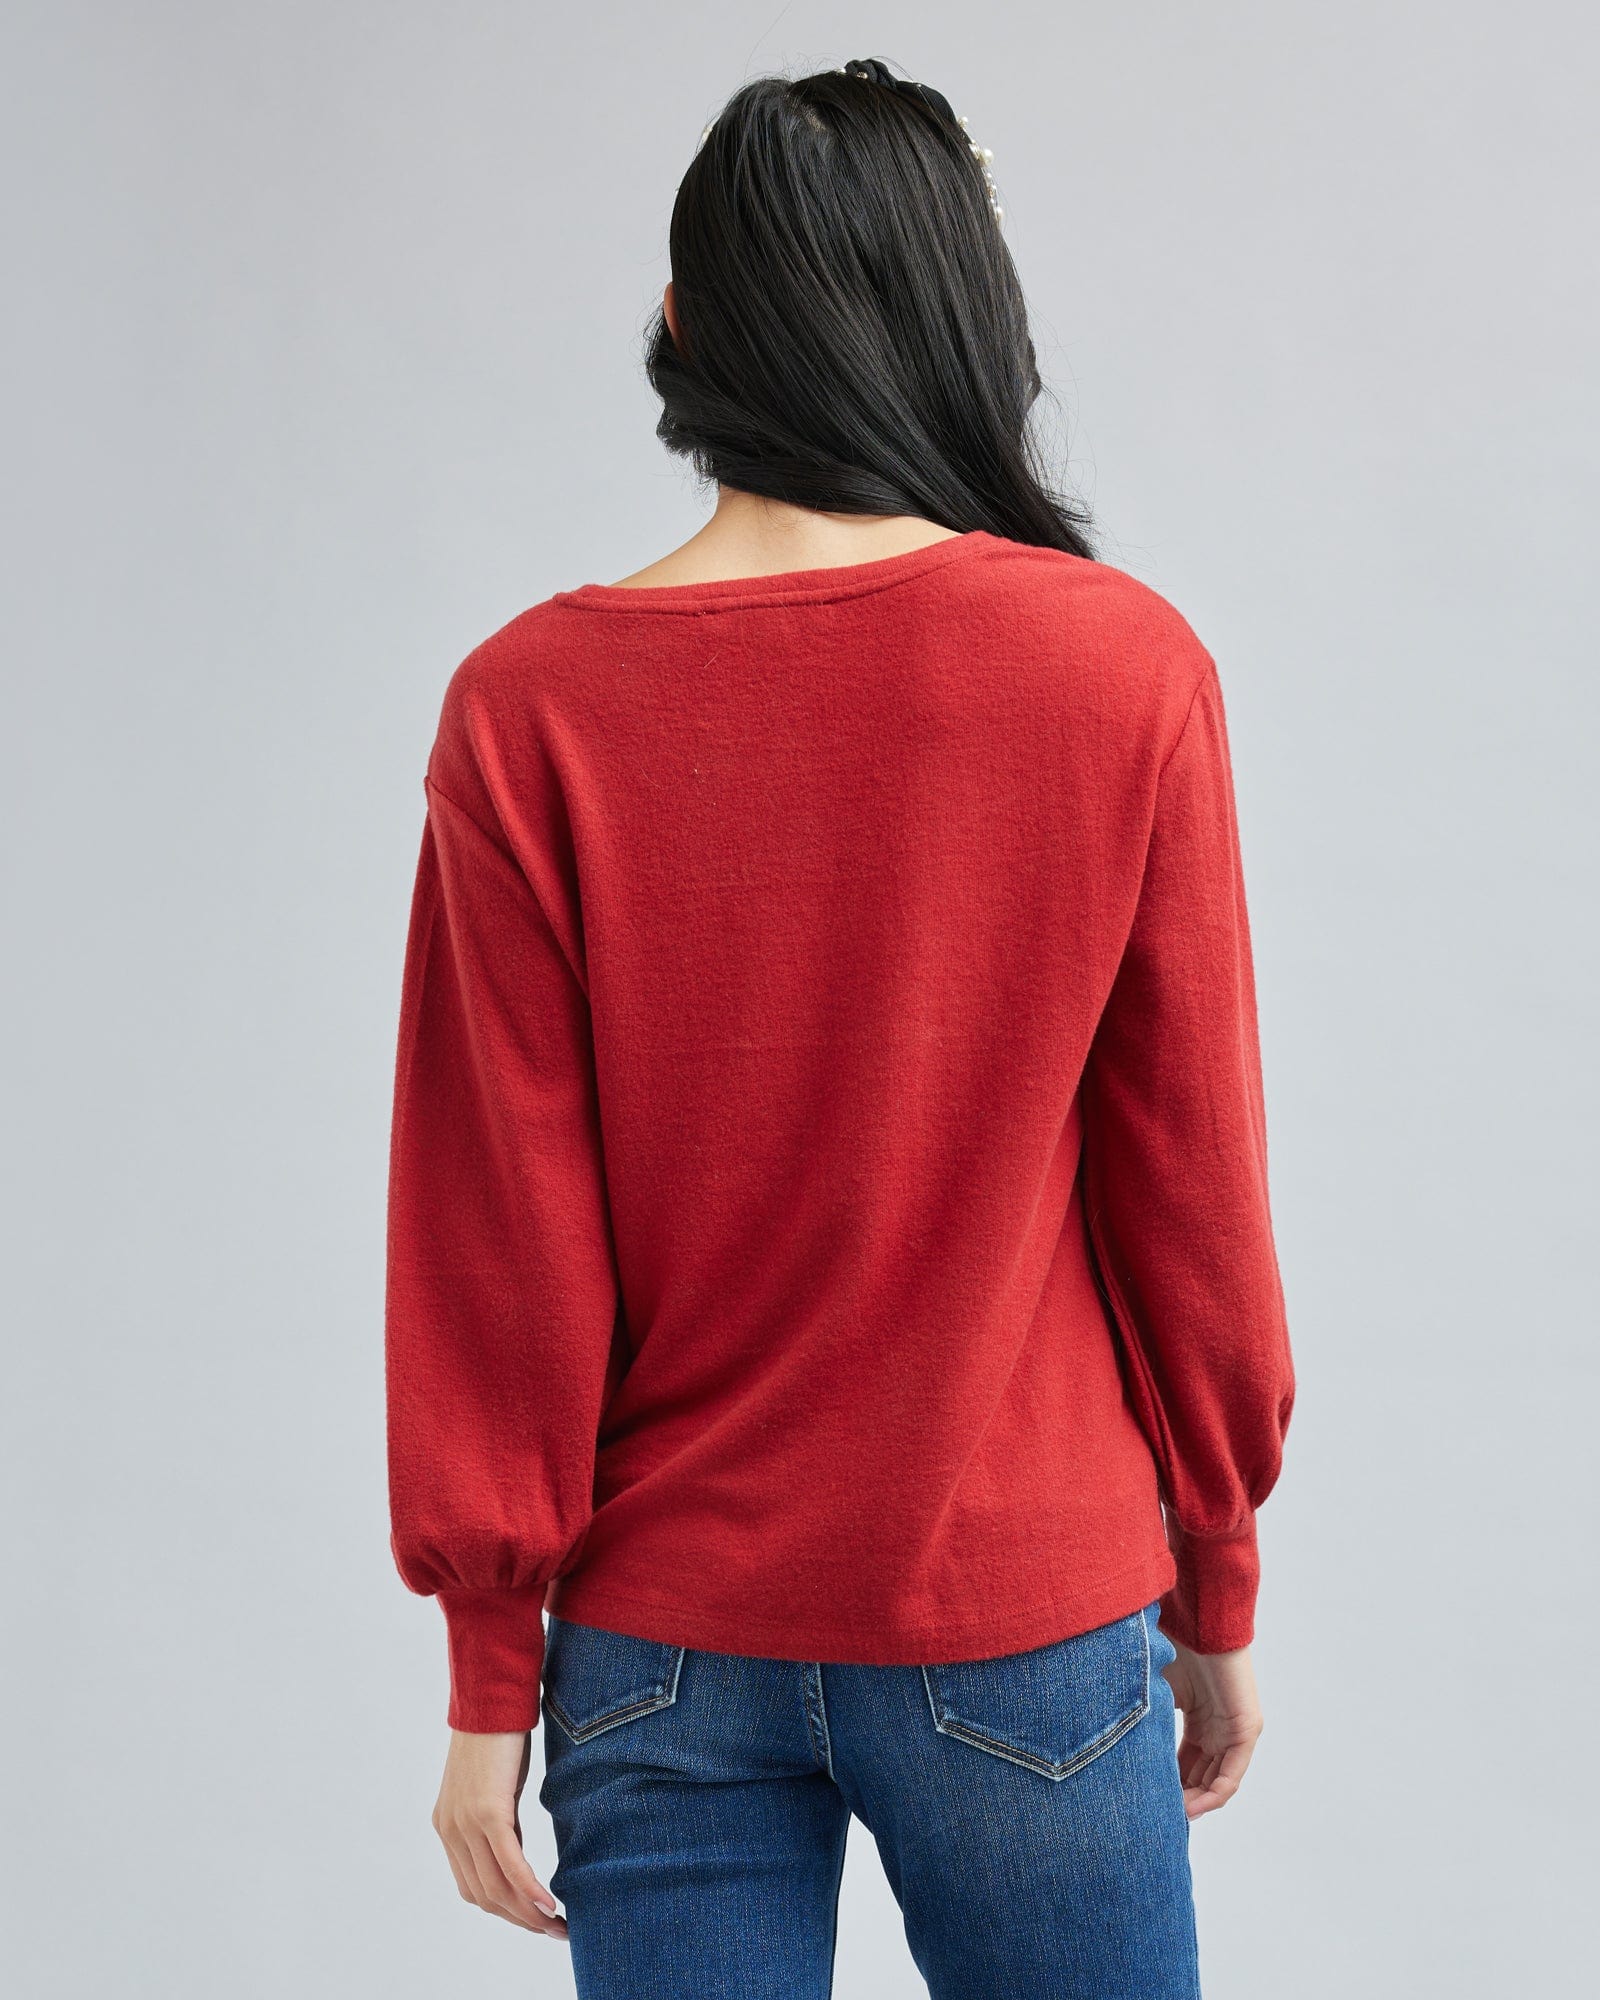 Woman in a long sleeve, red top